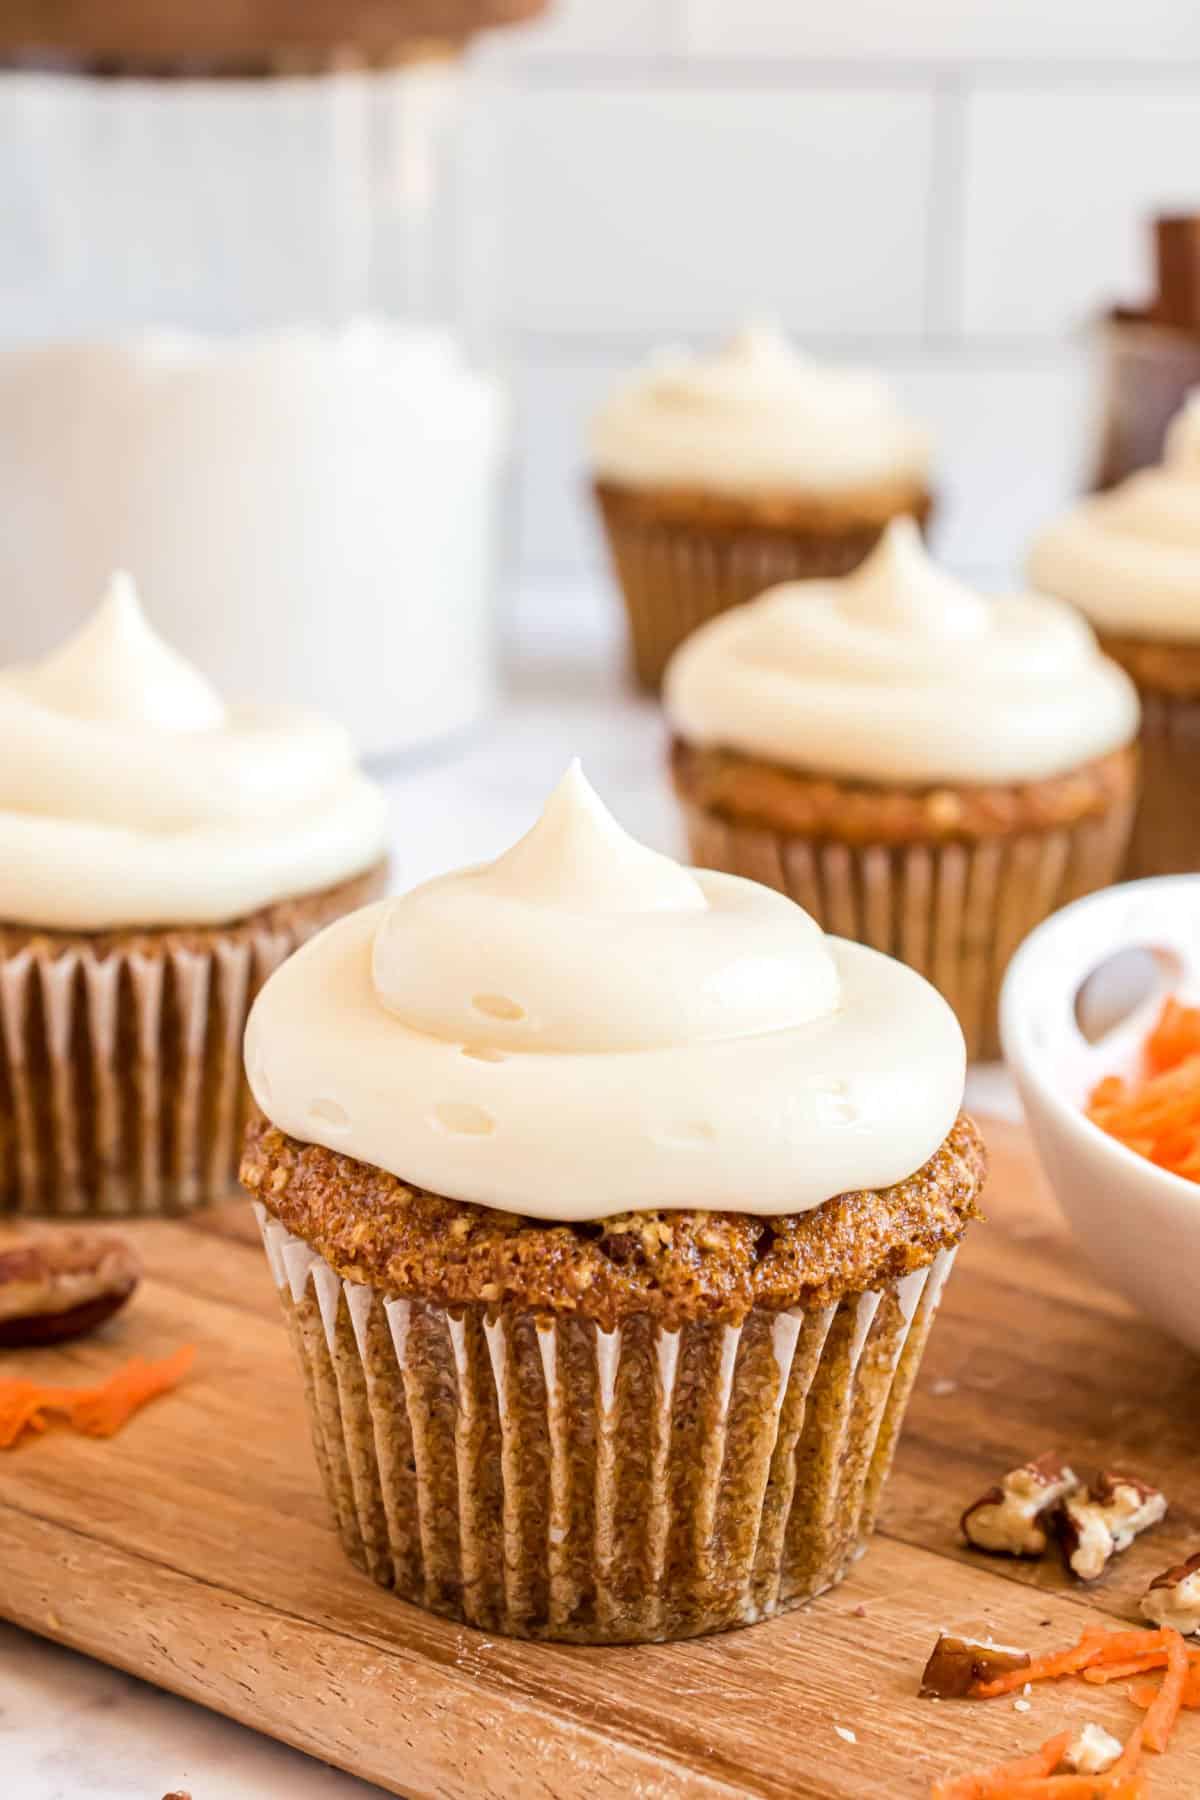 Carrot cake cupcake topped with swirl of cream cheese frosting.